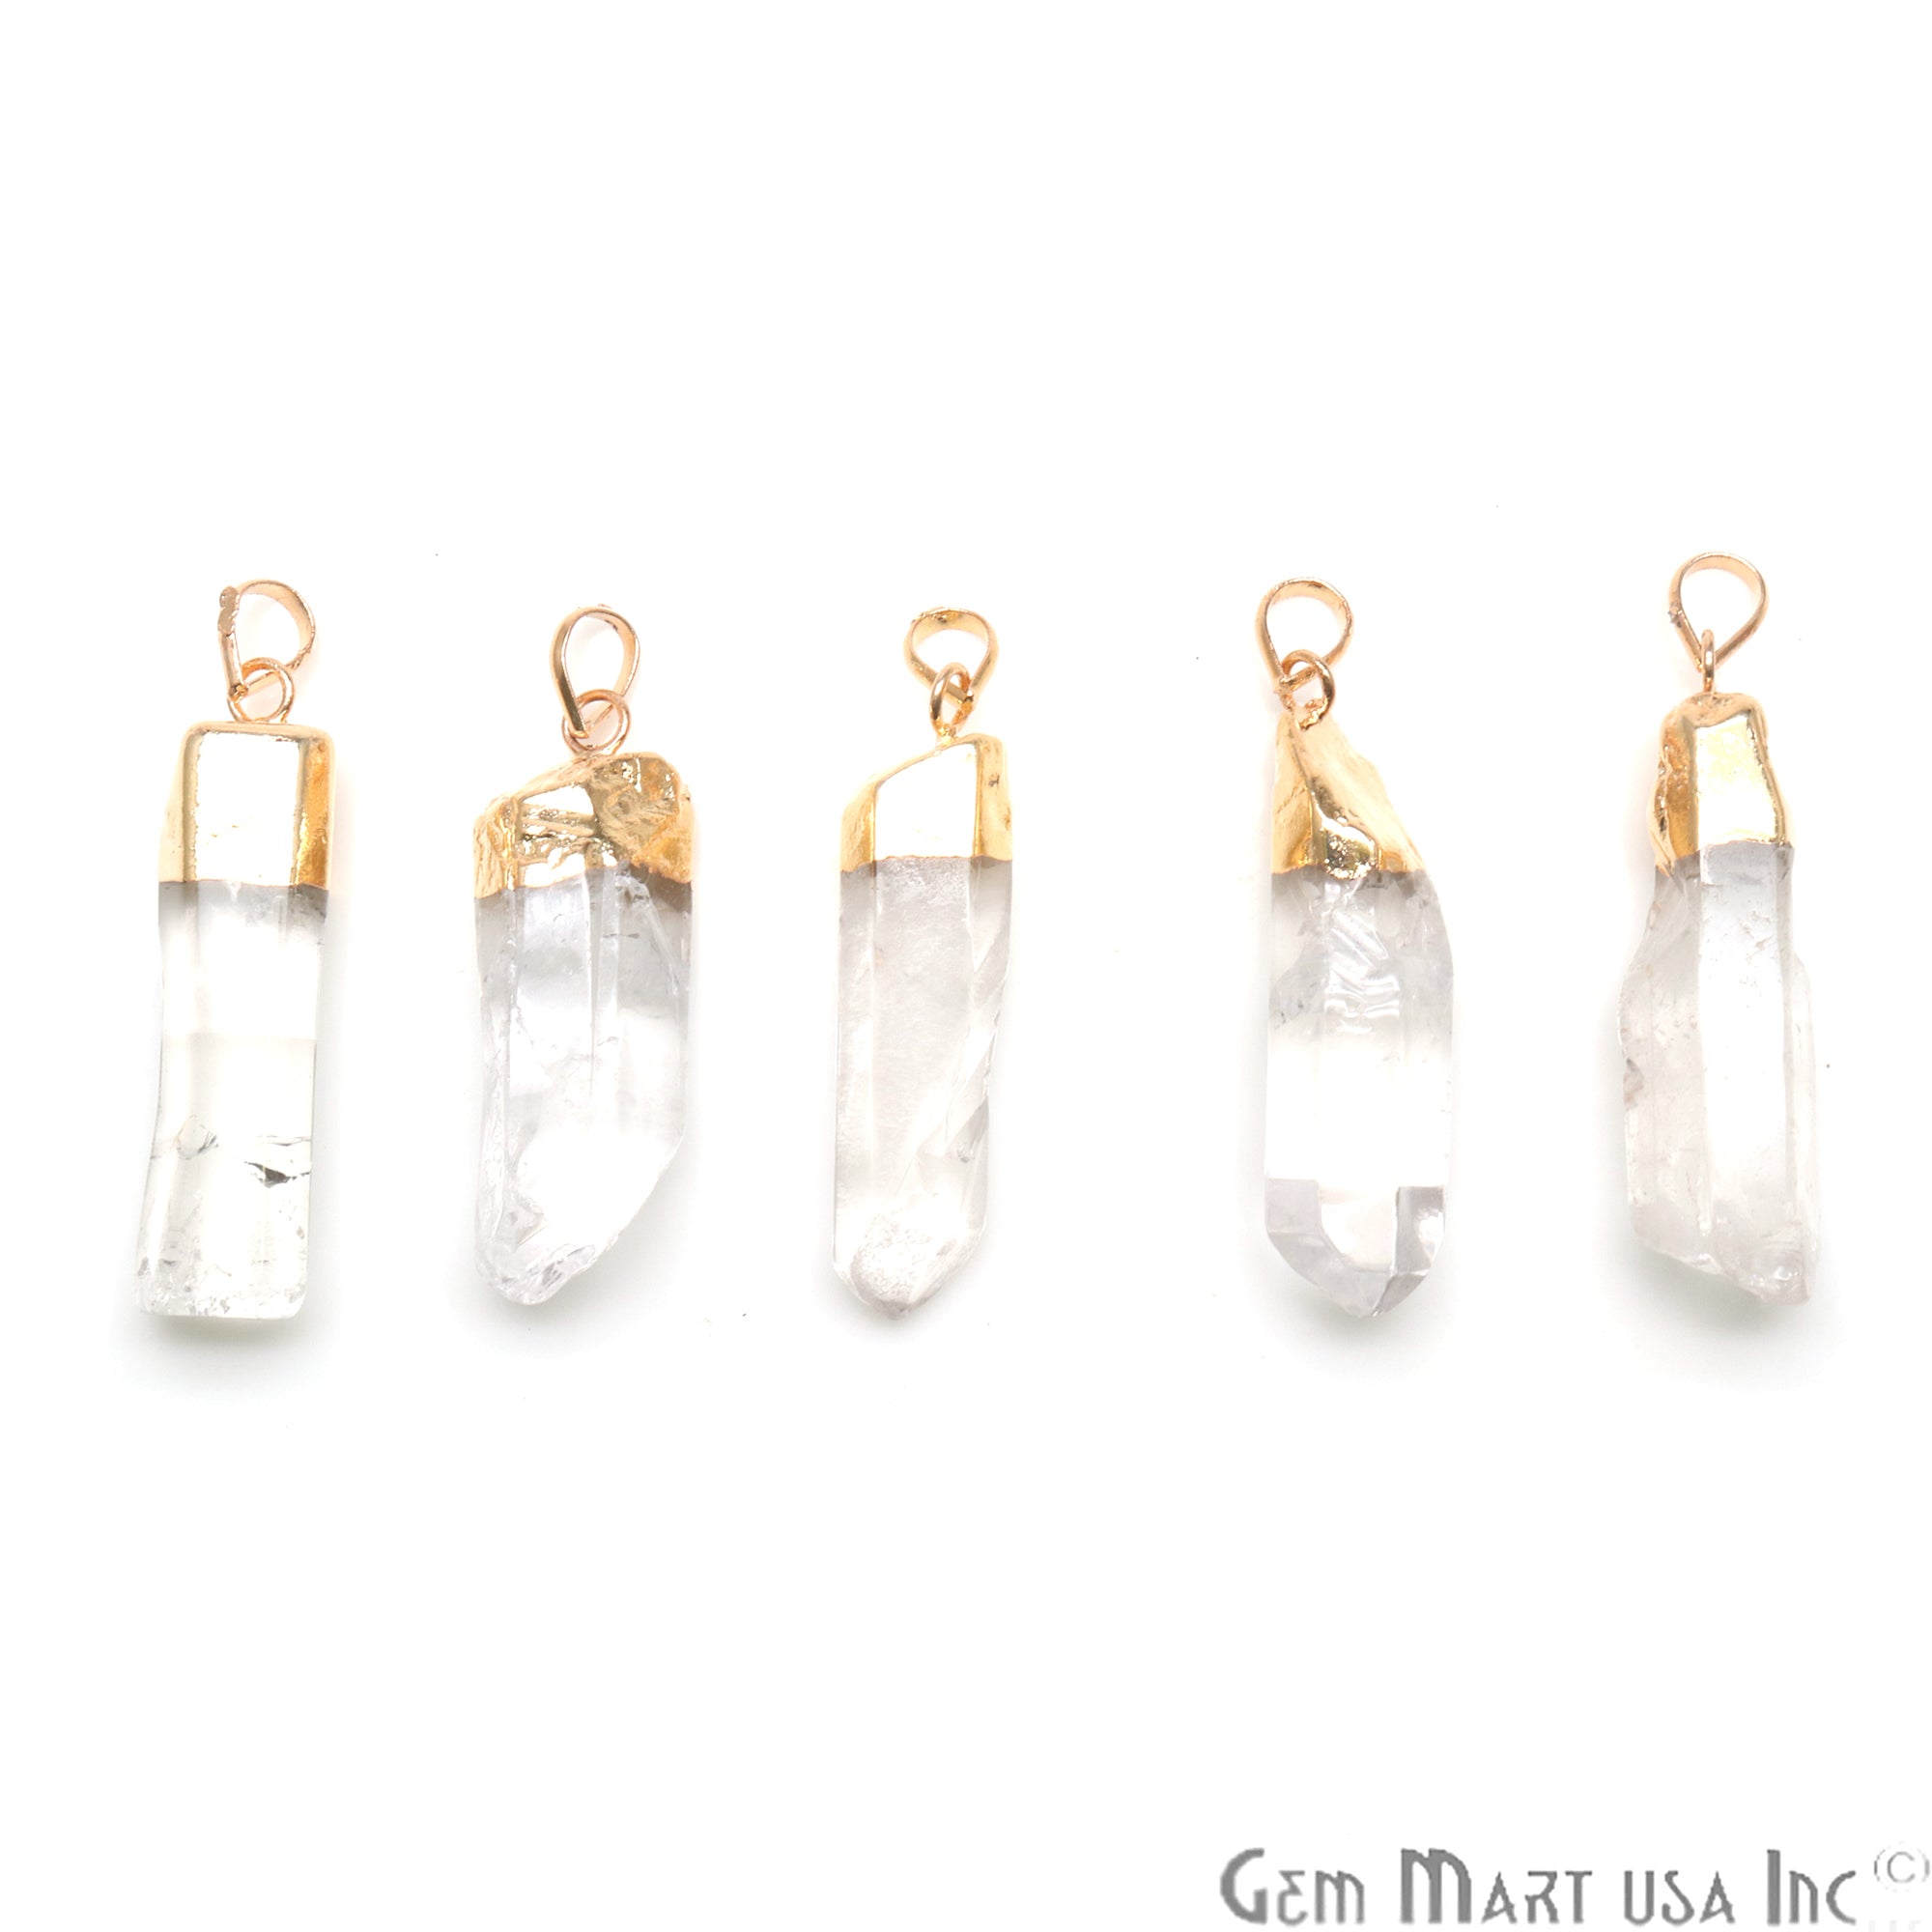 Crystal Point Pencil Pendant, 42x9mm 24k Gold Plated Gemstone Point Pencil Charm Pendant(GPCL-14046)